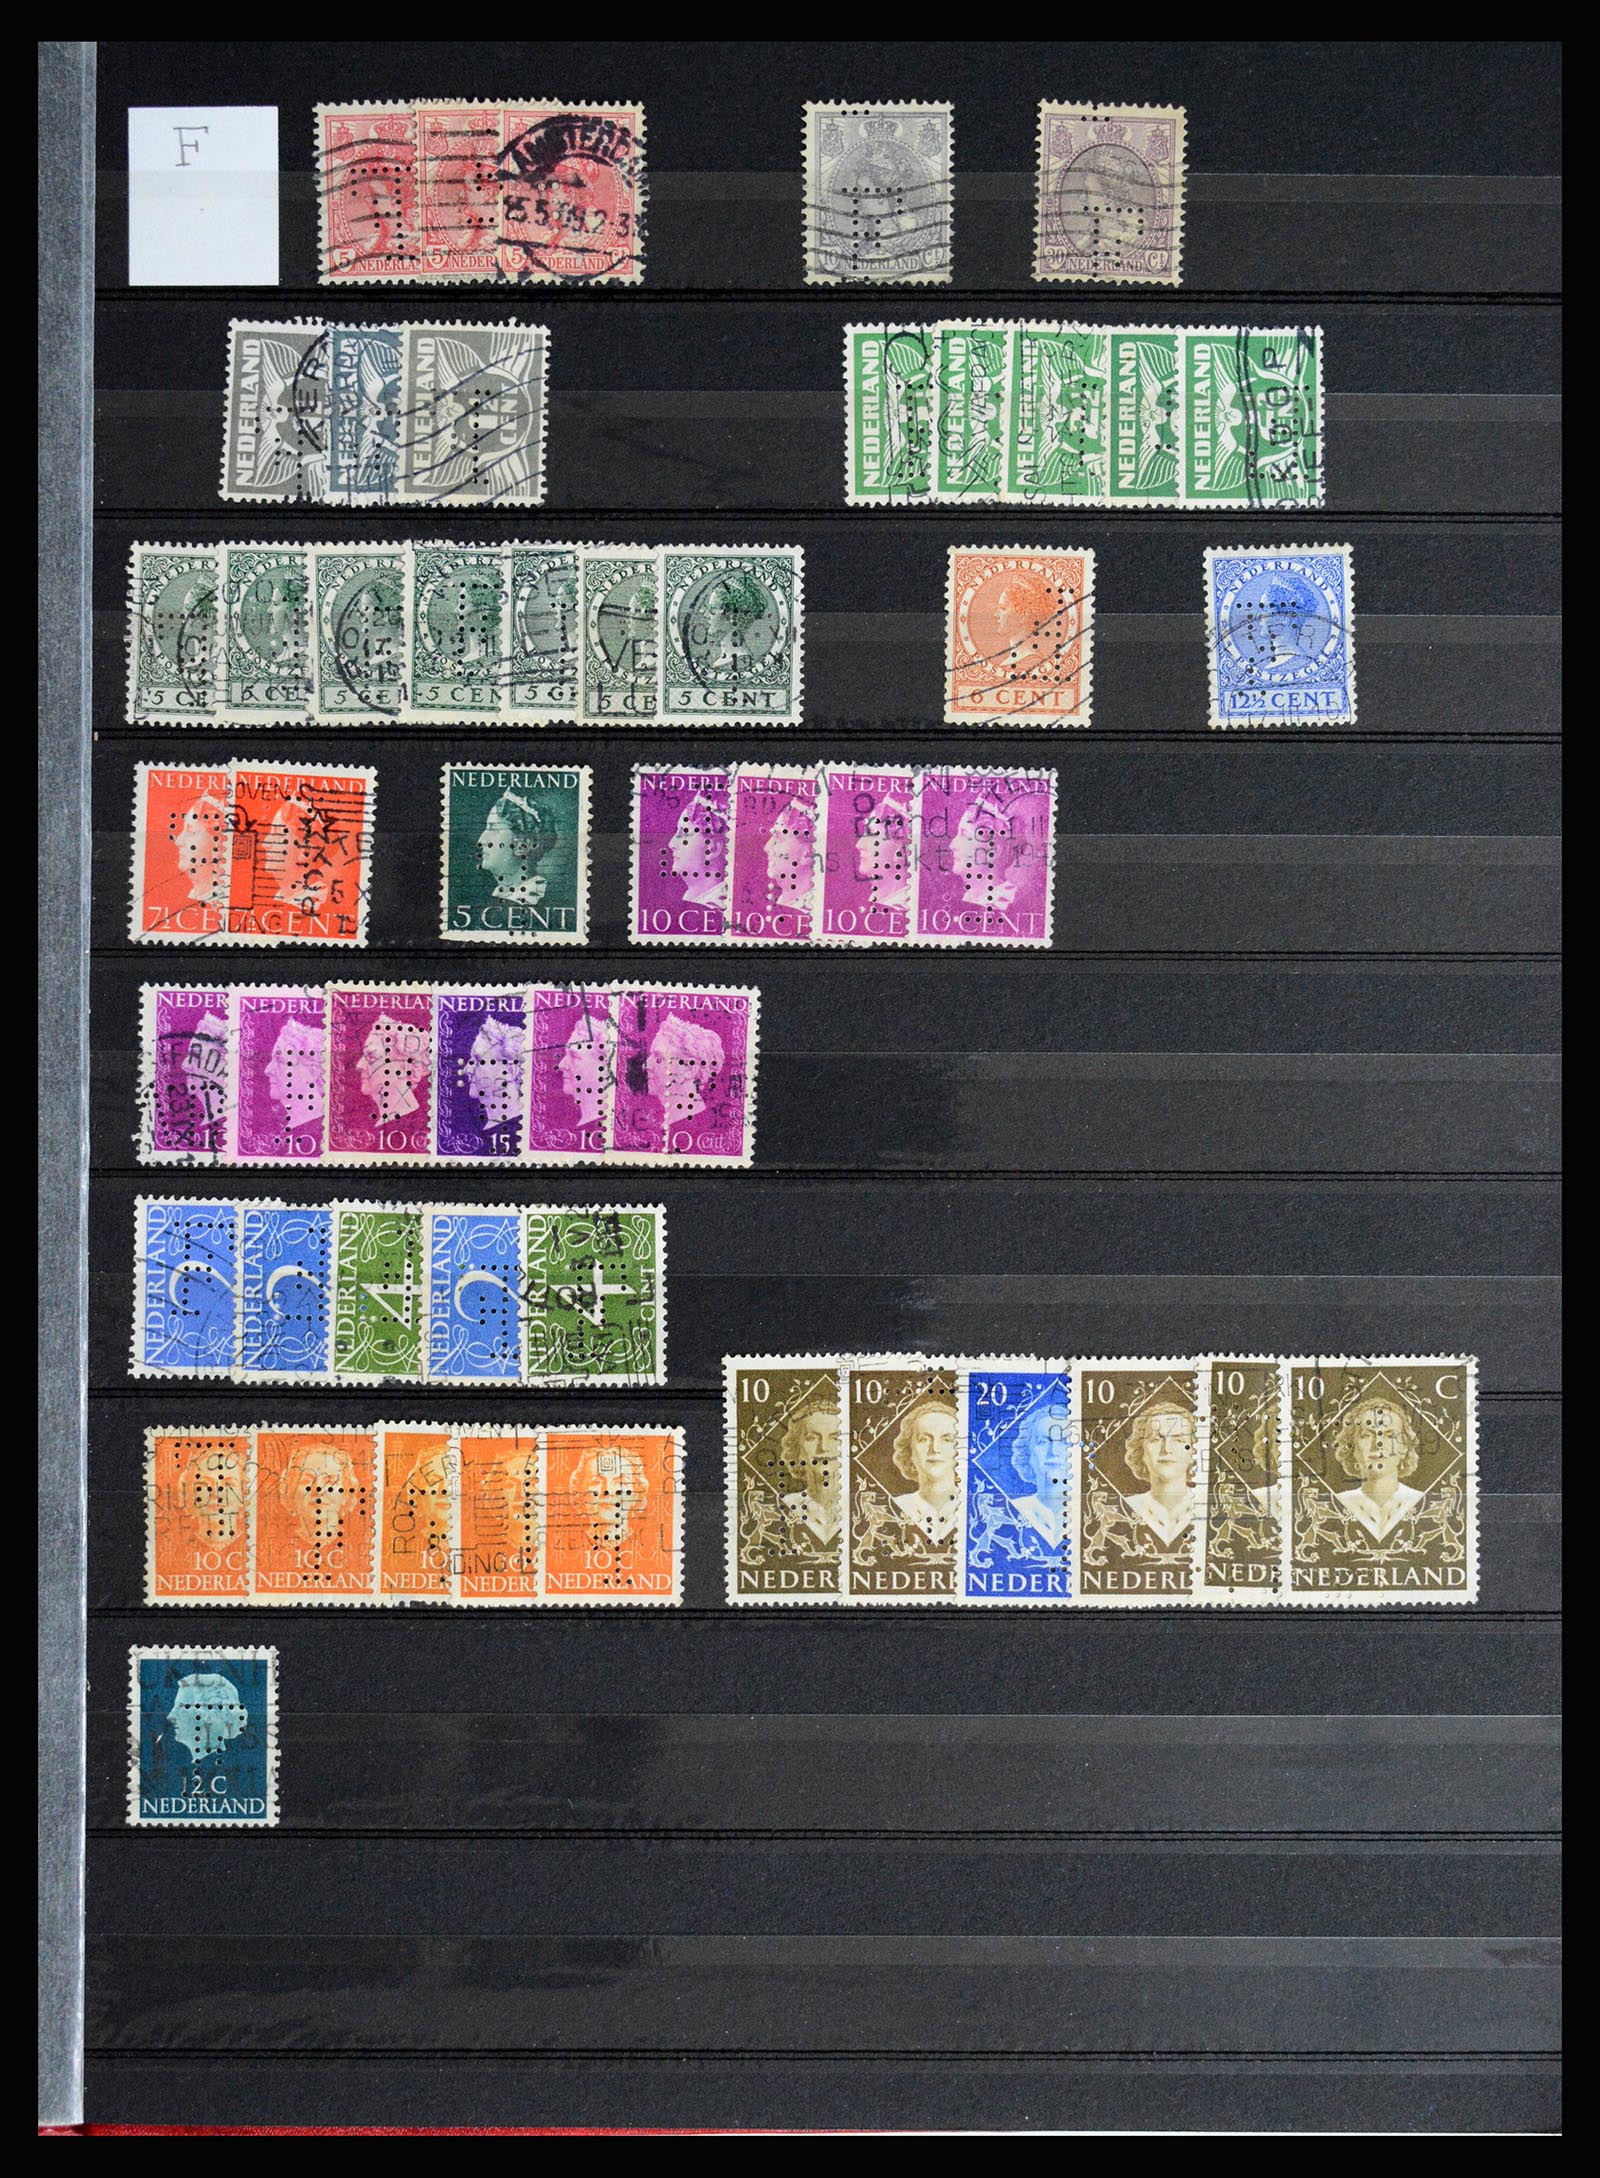 37054 011 - Stamp collection 37054 Netherlands perfins 1890-1960.